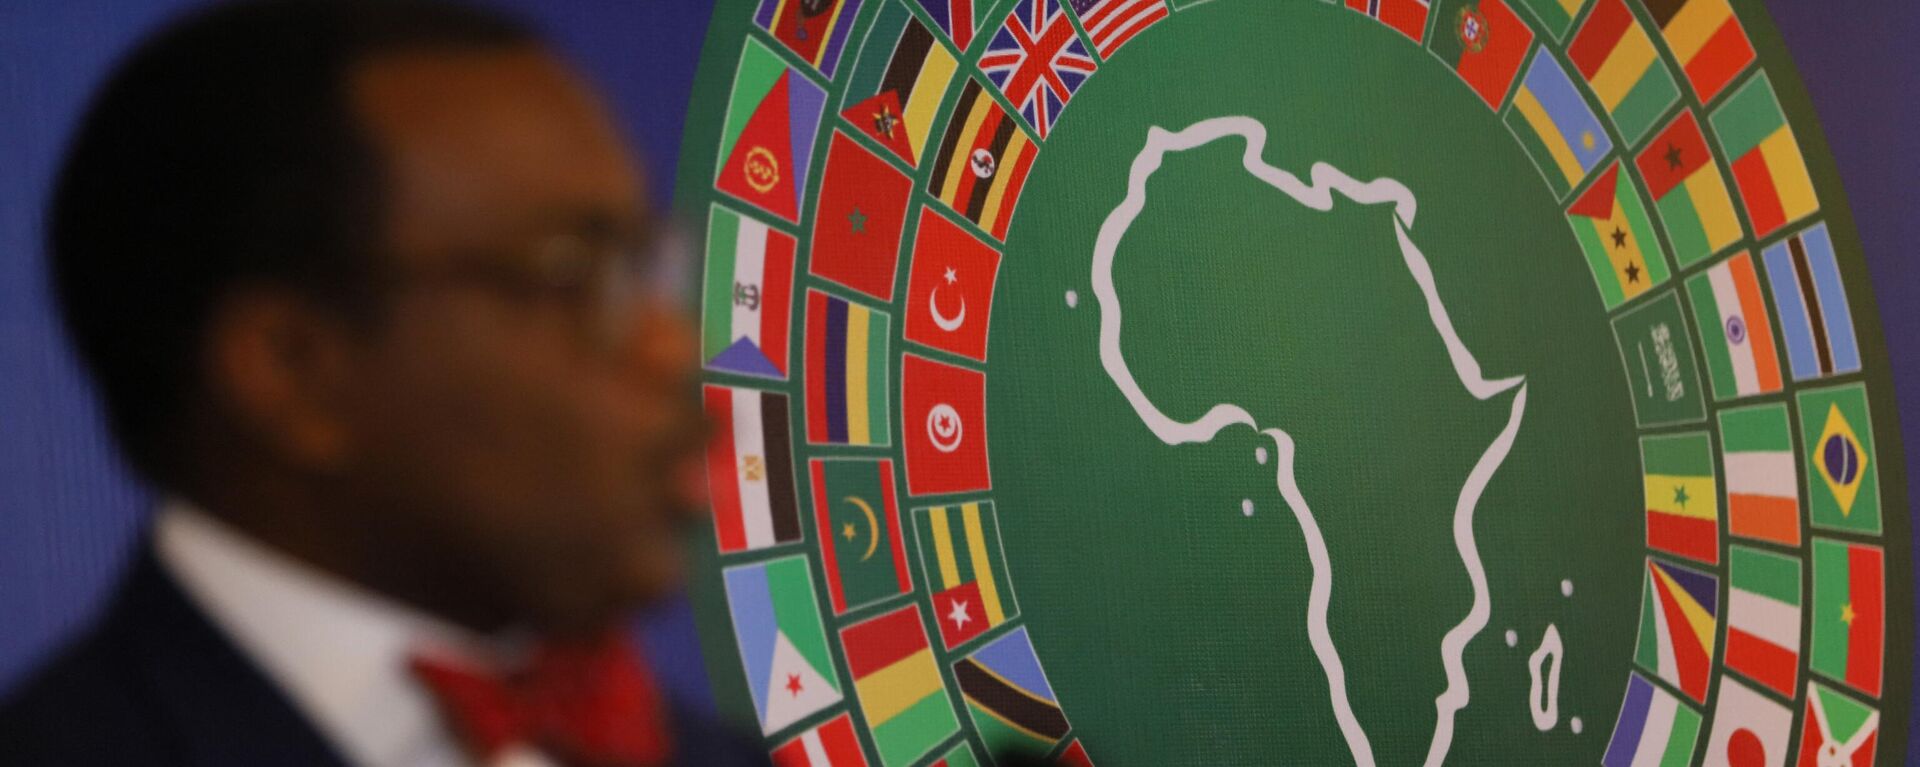 A logo with various national flags of countries around the world are seen as Akinwumi Adesina, president of the African Development Bank Group, speaks at the African Development Bank’s Annual meeting in Accra, Ghana, on May 23, 2022.  - Sputnik International, 1920, 20.01.2023